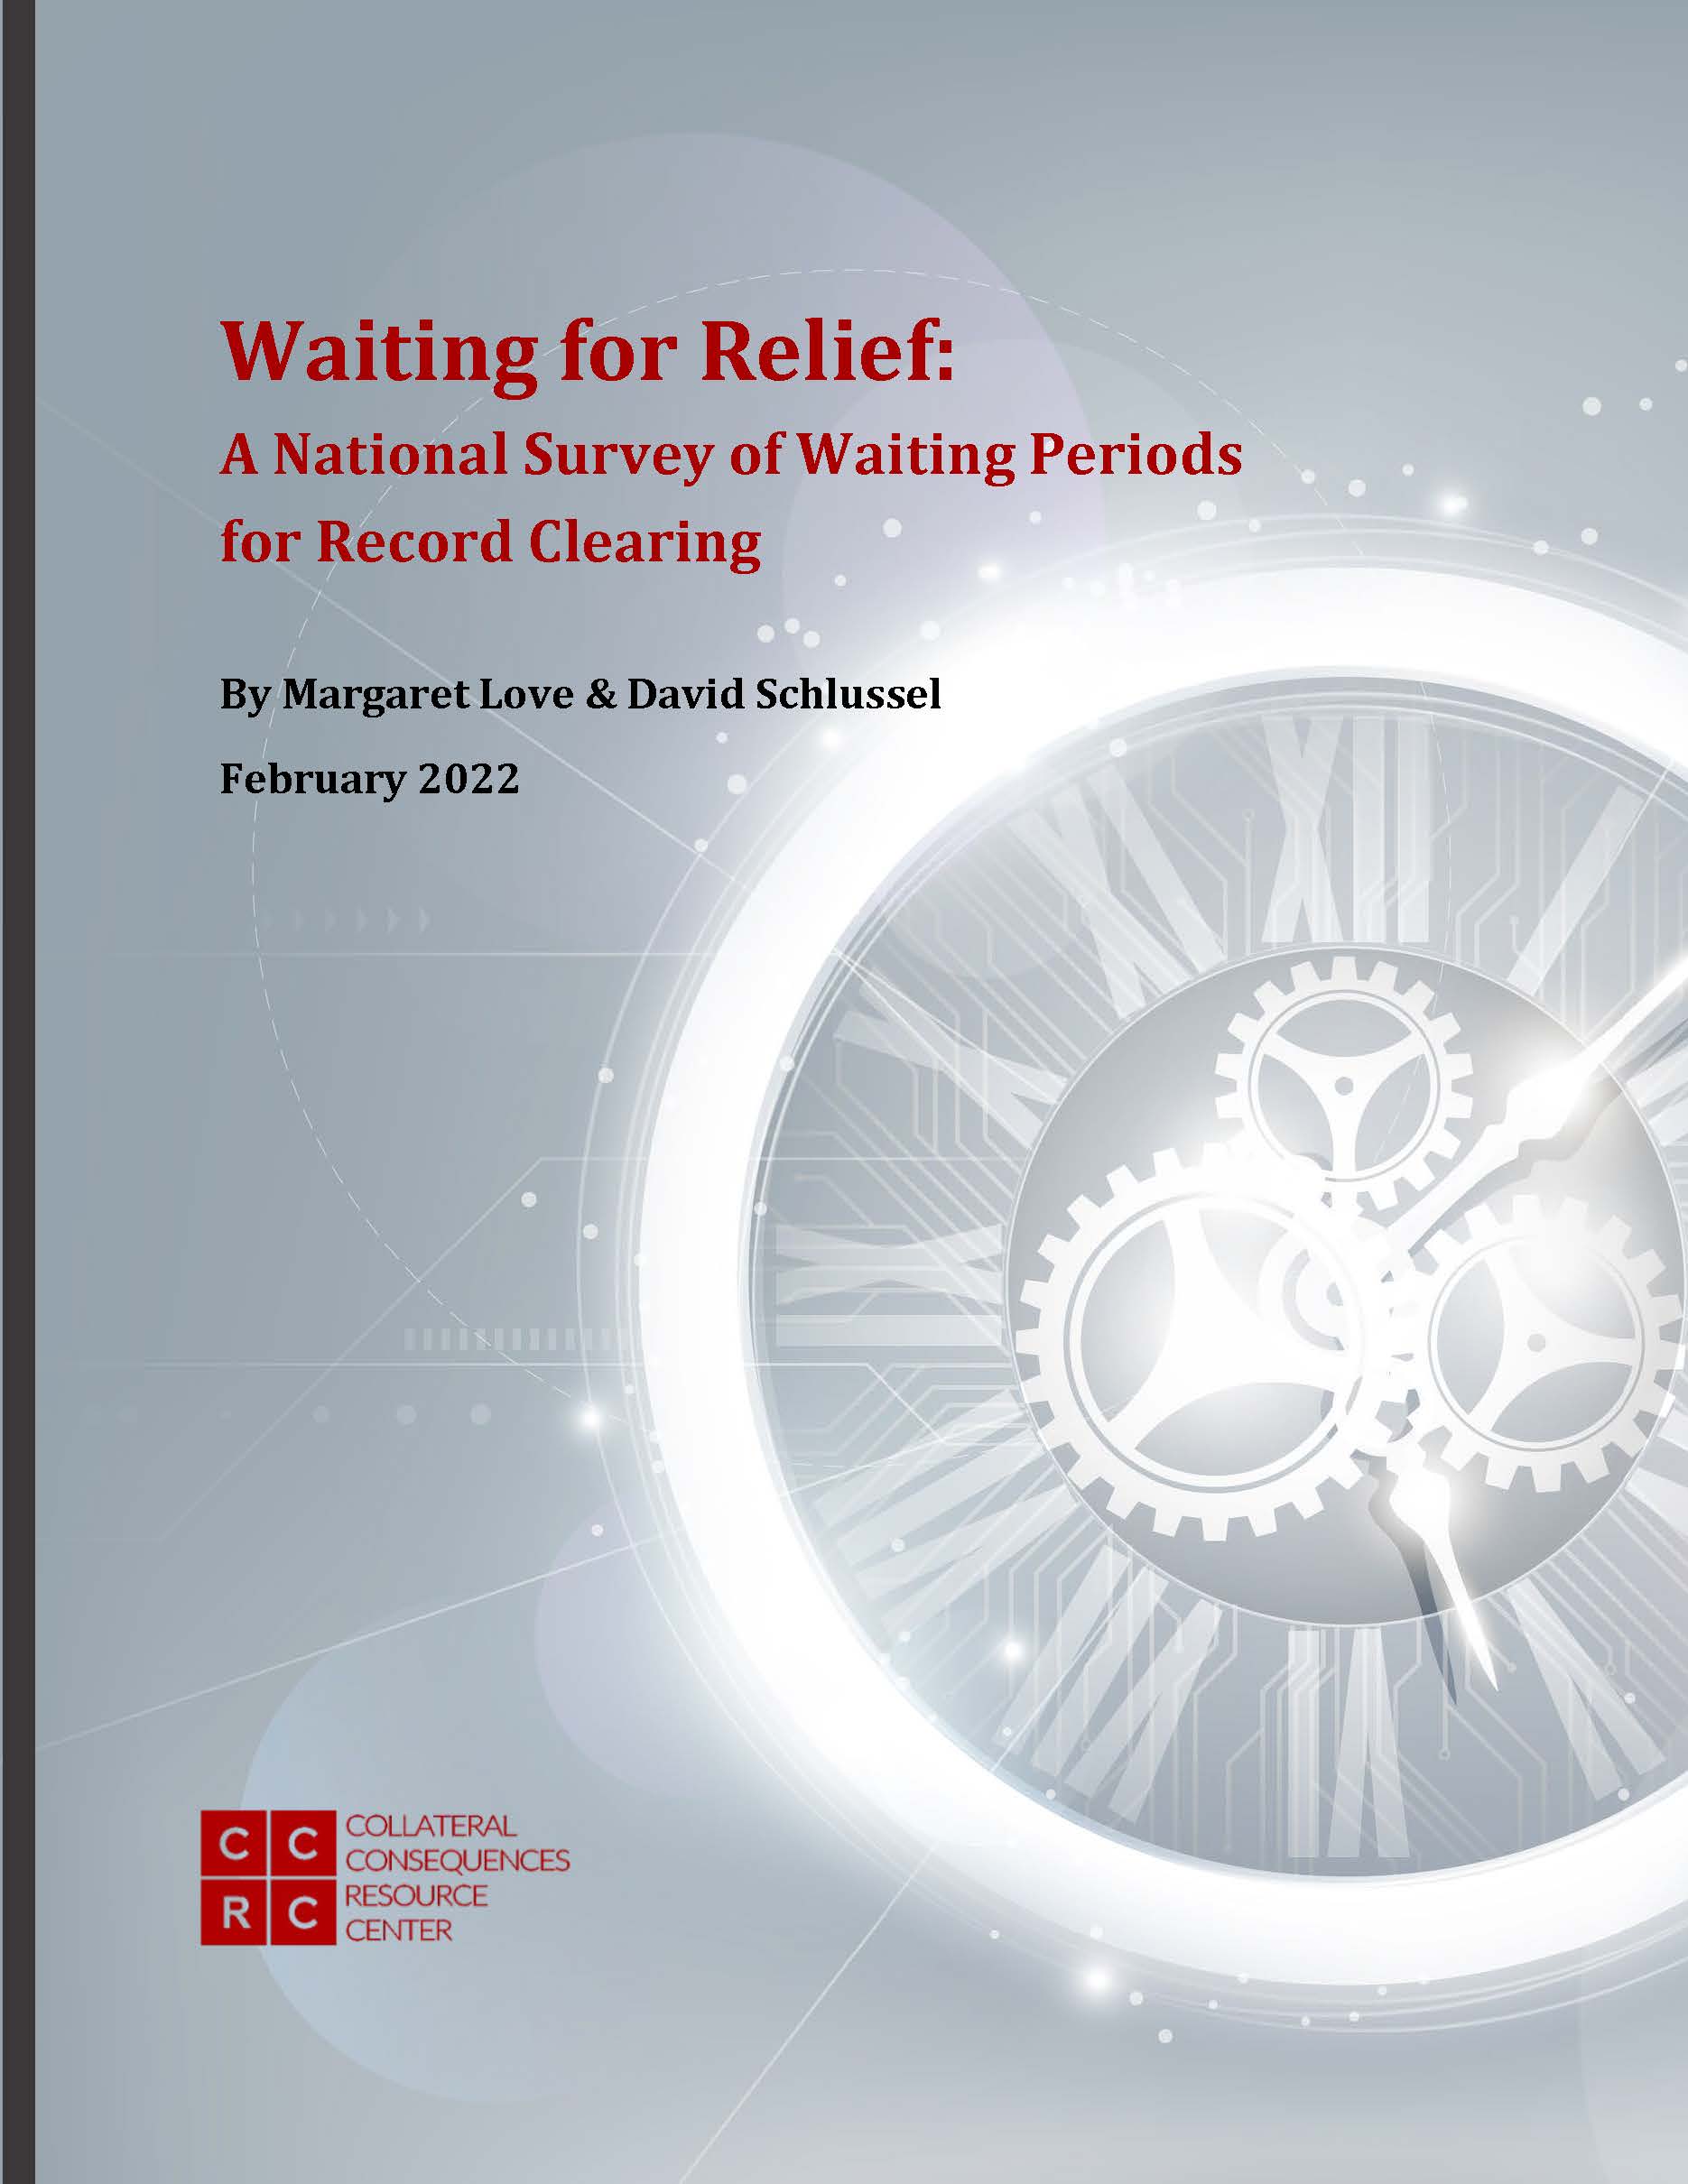 Waiting for Relief: A National Survey of Waiting Periods for Record Clearing